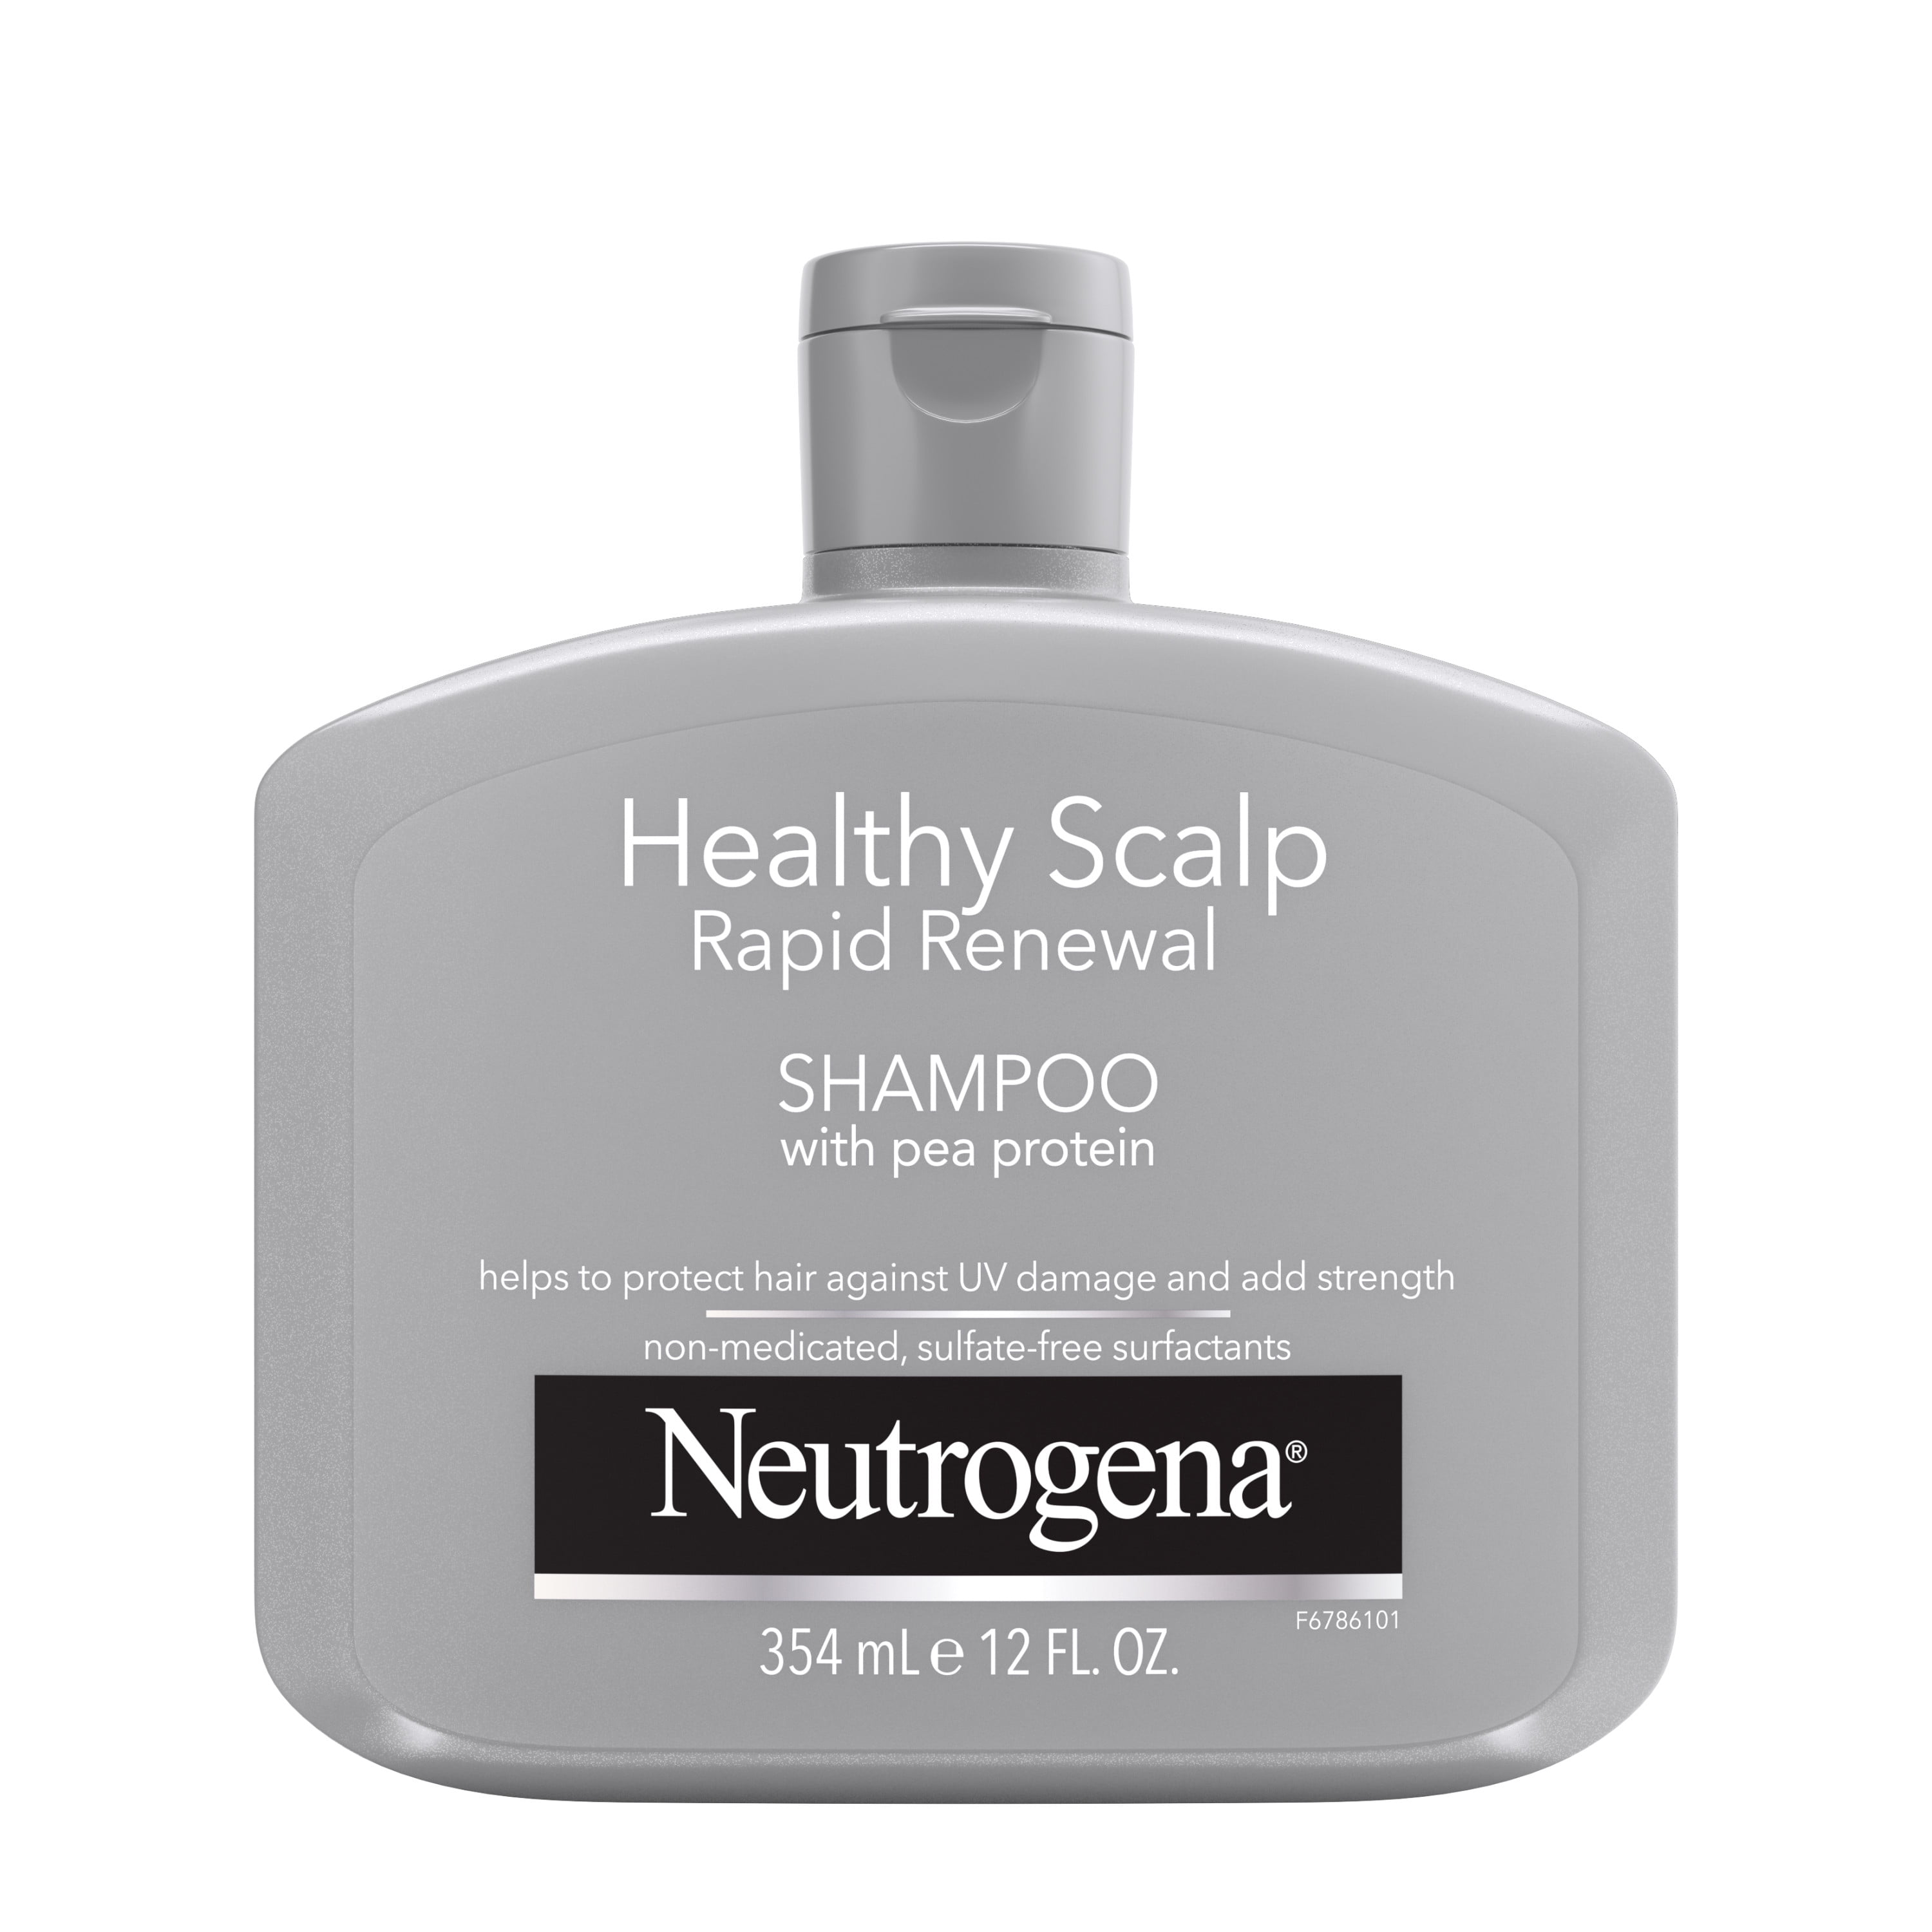 Neutrogena Healthy Scalp Rapid Renewal Shampoo with Pea Protein, UV Damage Protecting Shampoo for Strong Healthy-Looking Hair, 12 Fl Oz